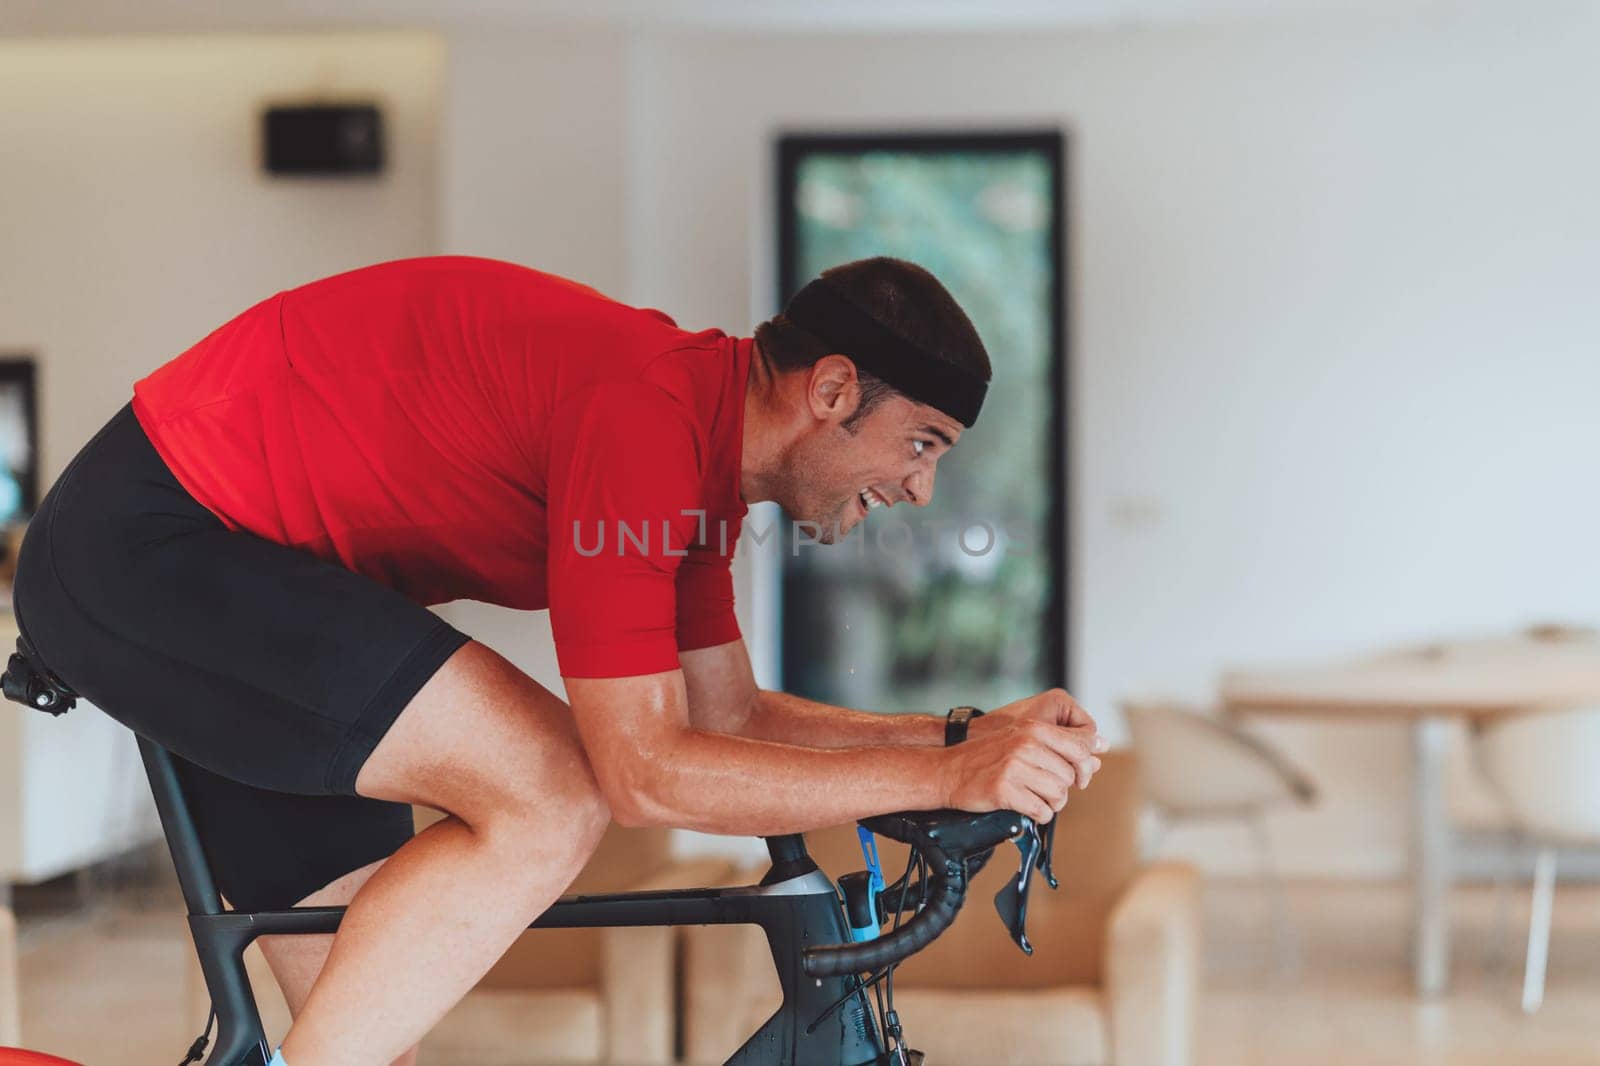 A man riding a triathlon bike on a machine simulation in a modern living room. Training during pandemic conditions